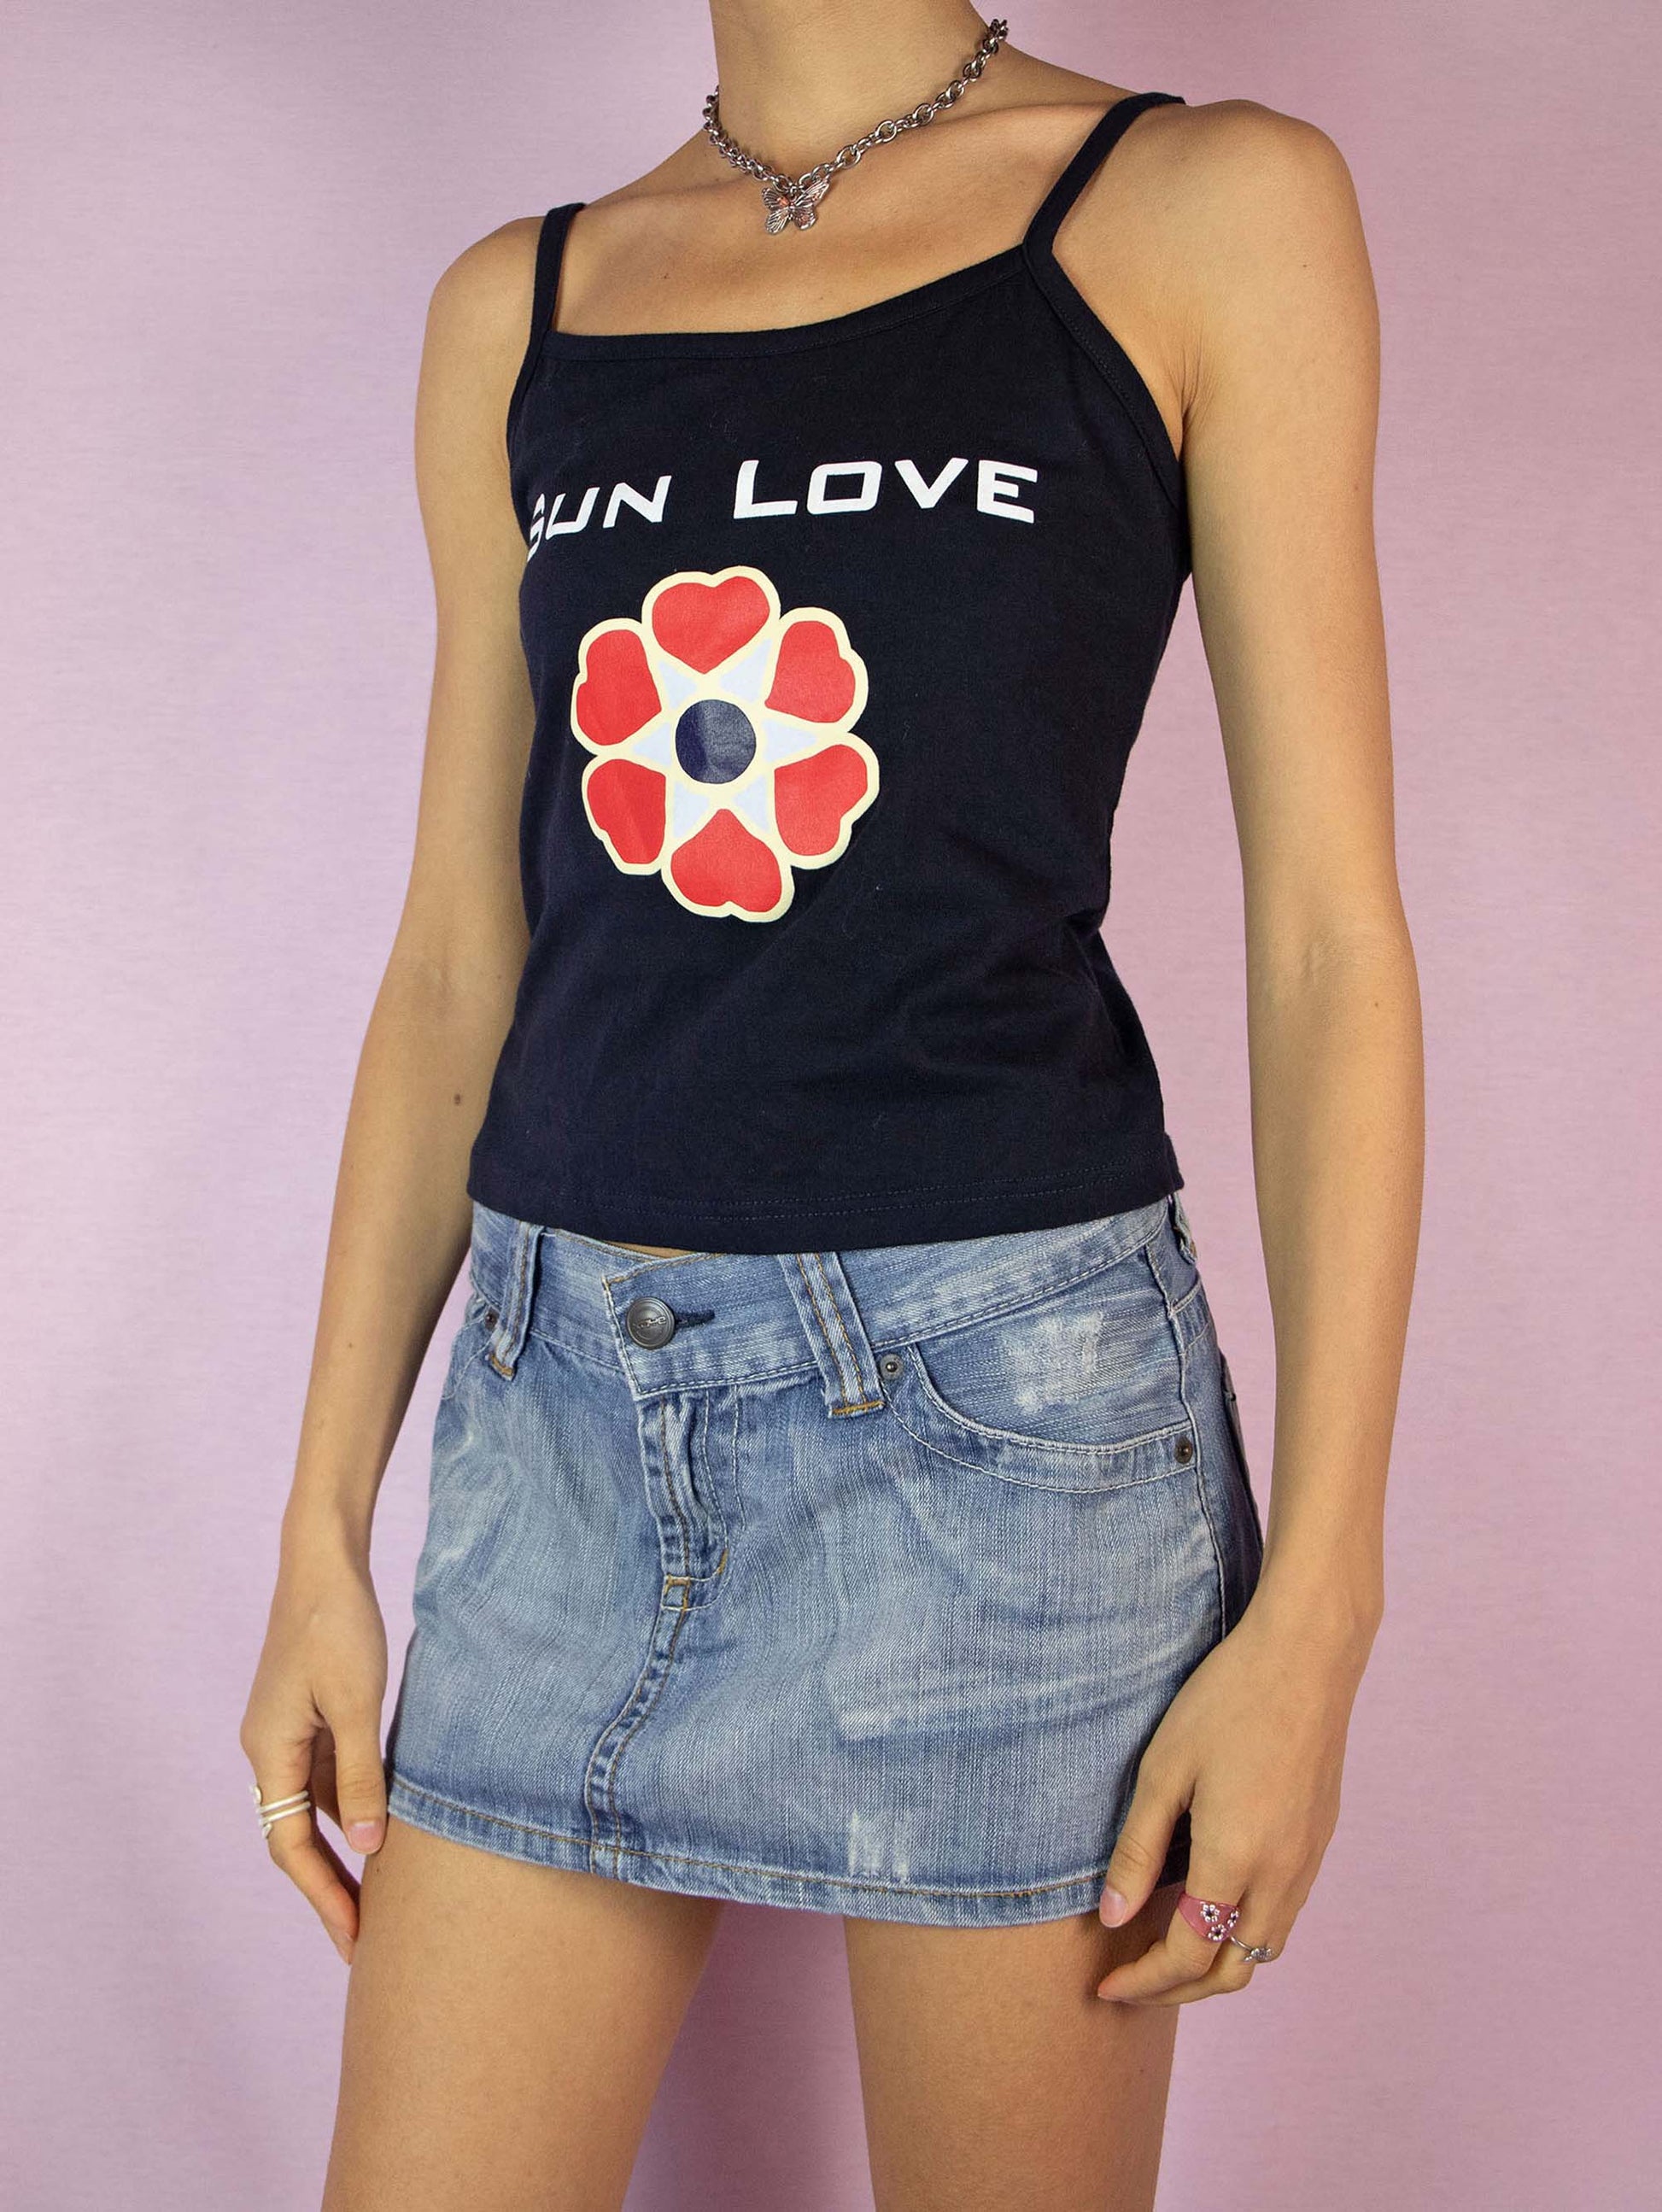 The Y2K Summer Graphic Tank Top is a vintage 2000s dark navy almost black boho beach top. Made in Italy.